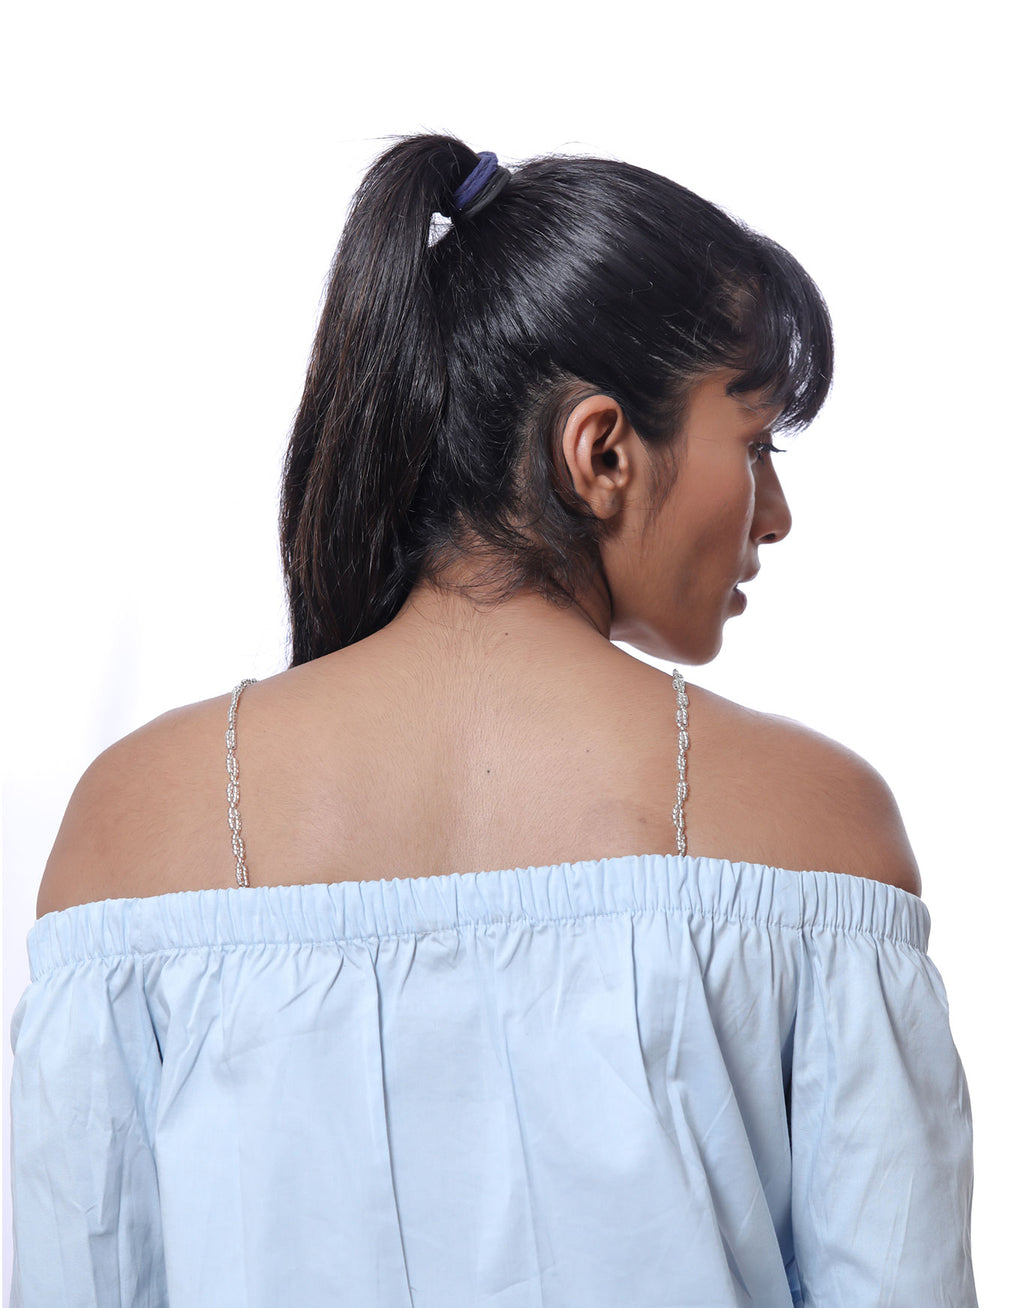 It's time to flaunt your exclusive beaded bra straps by Yuvanta